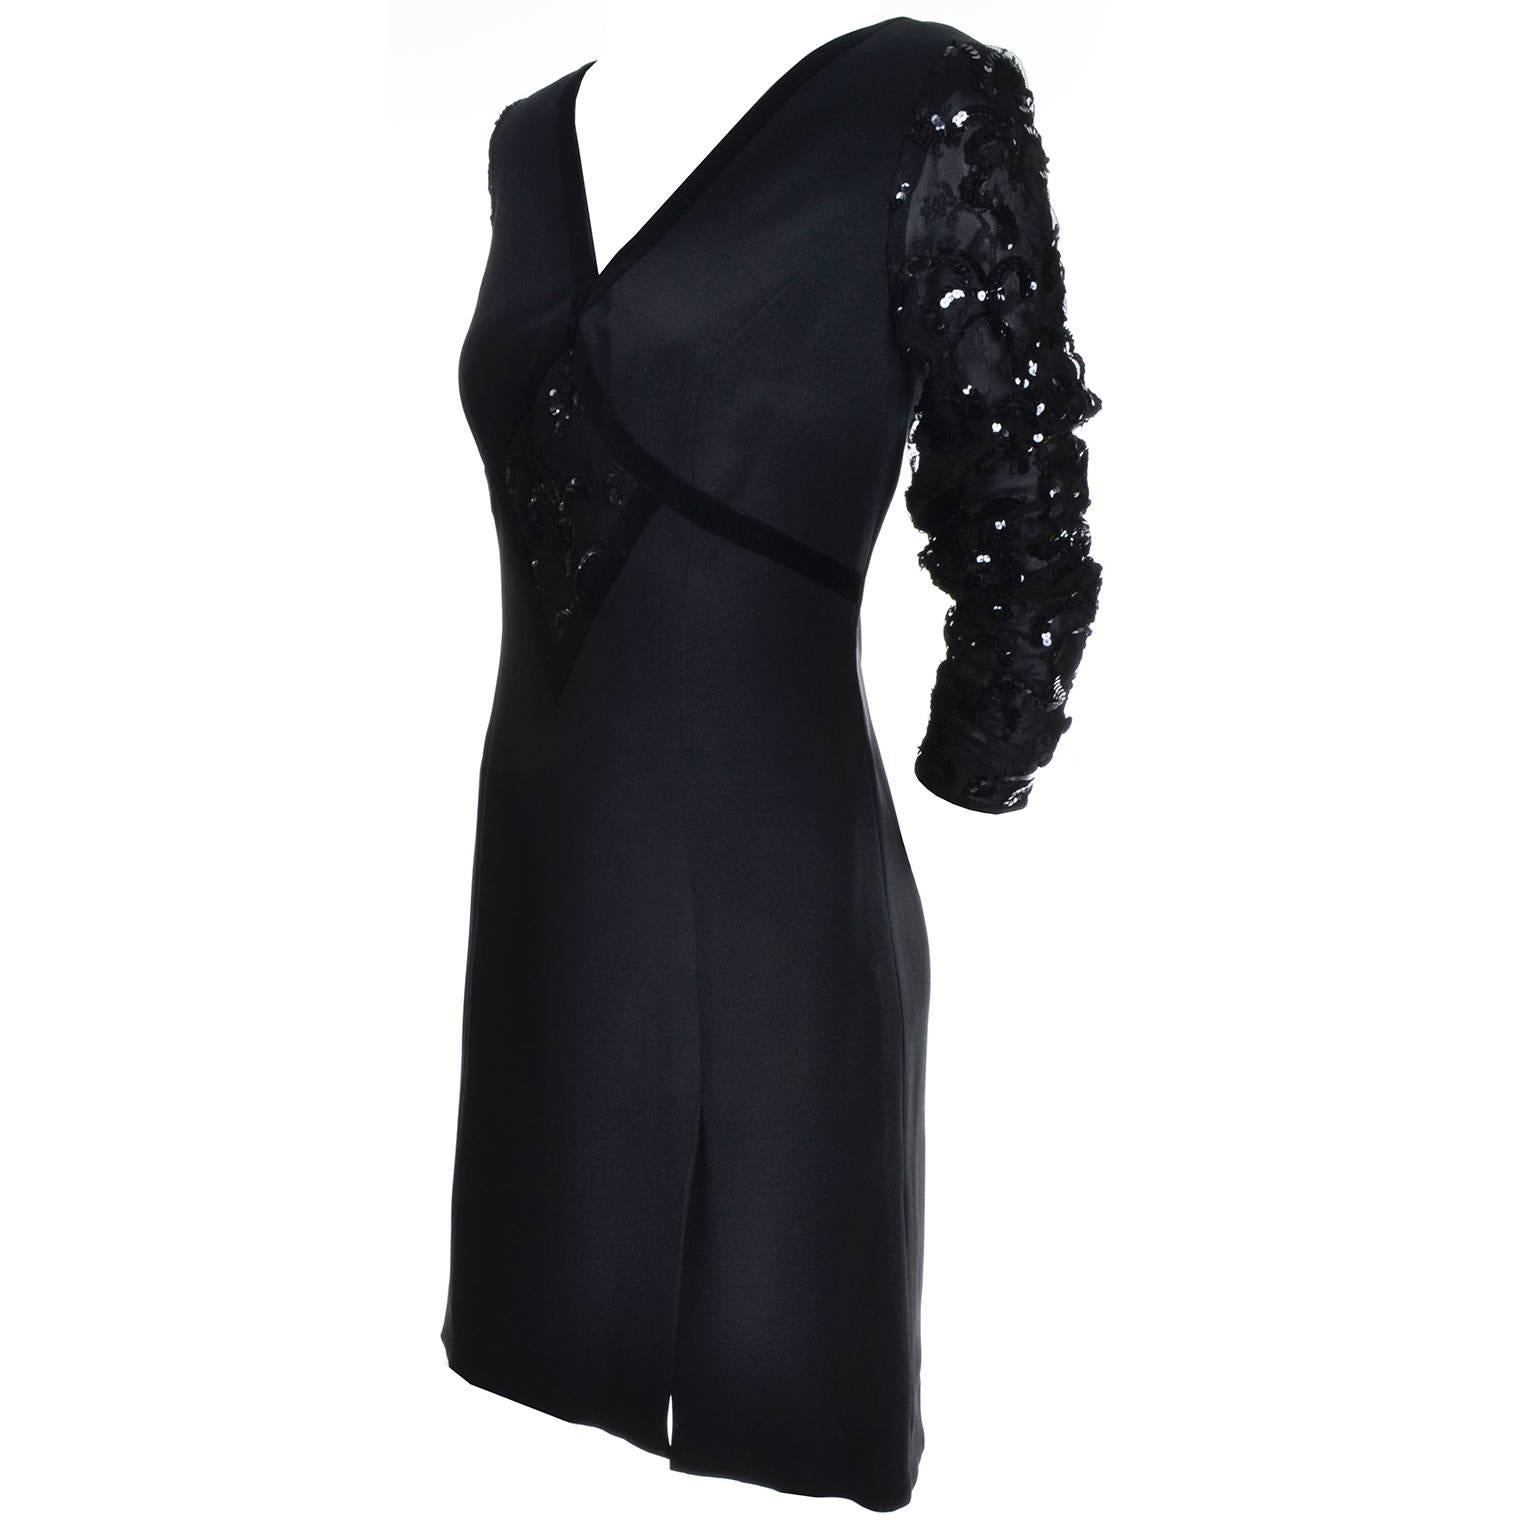 This is a great vintage little black dress from Escada couture.  The dress is silk with velvet trim and sequins.  The sleeves are sheer silk chiffon covered in sequins with covered buttons at the cuffs.  There is a back zipper, a front side slit,